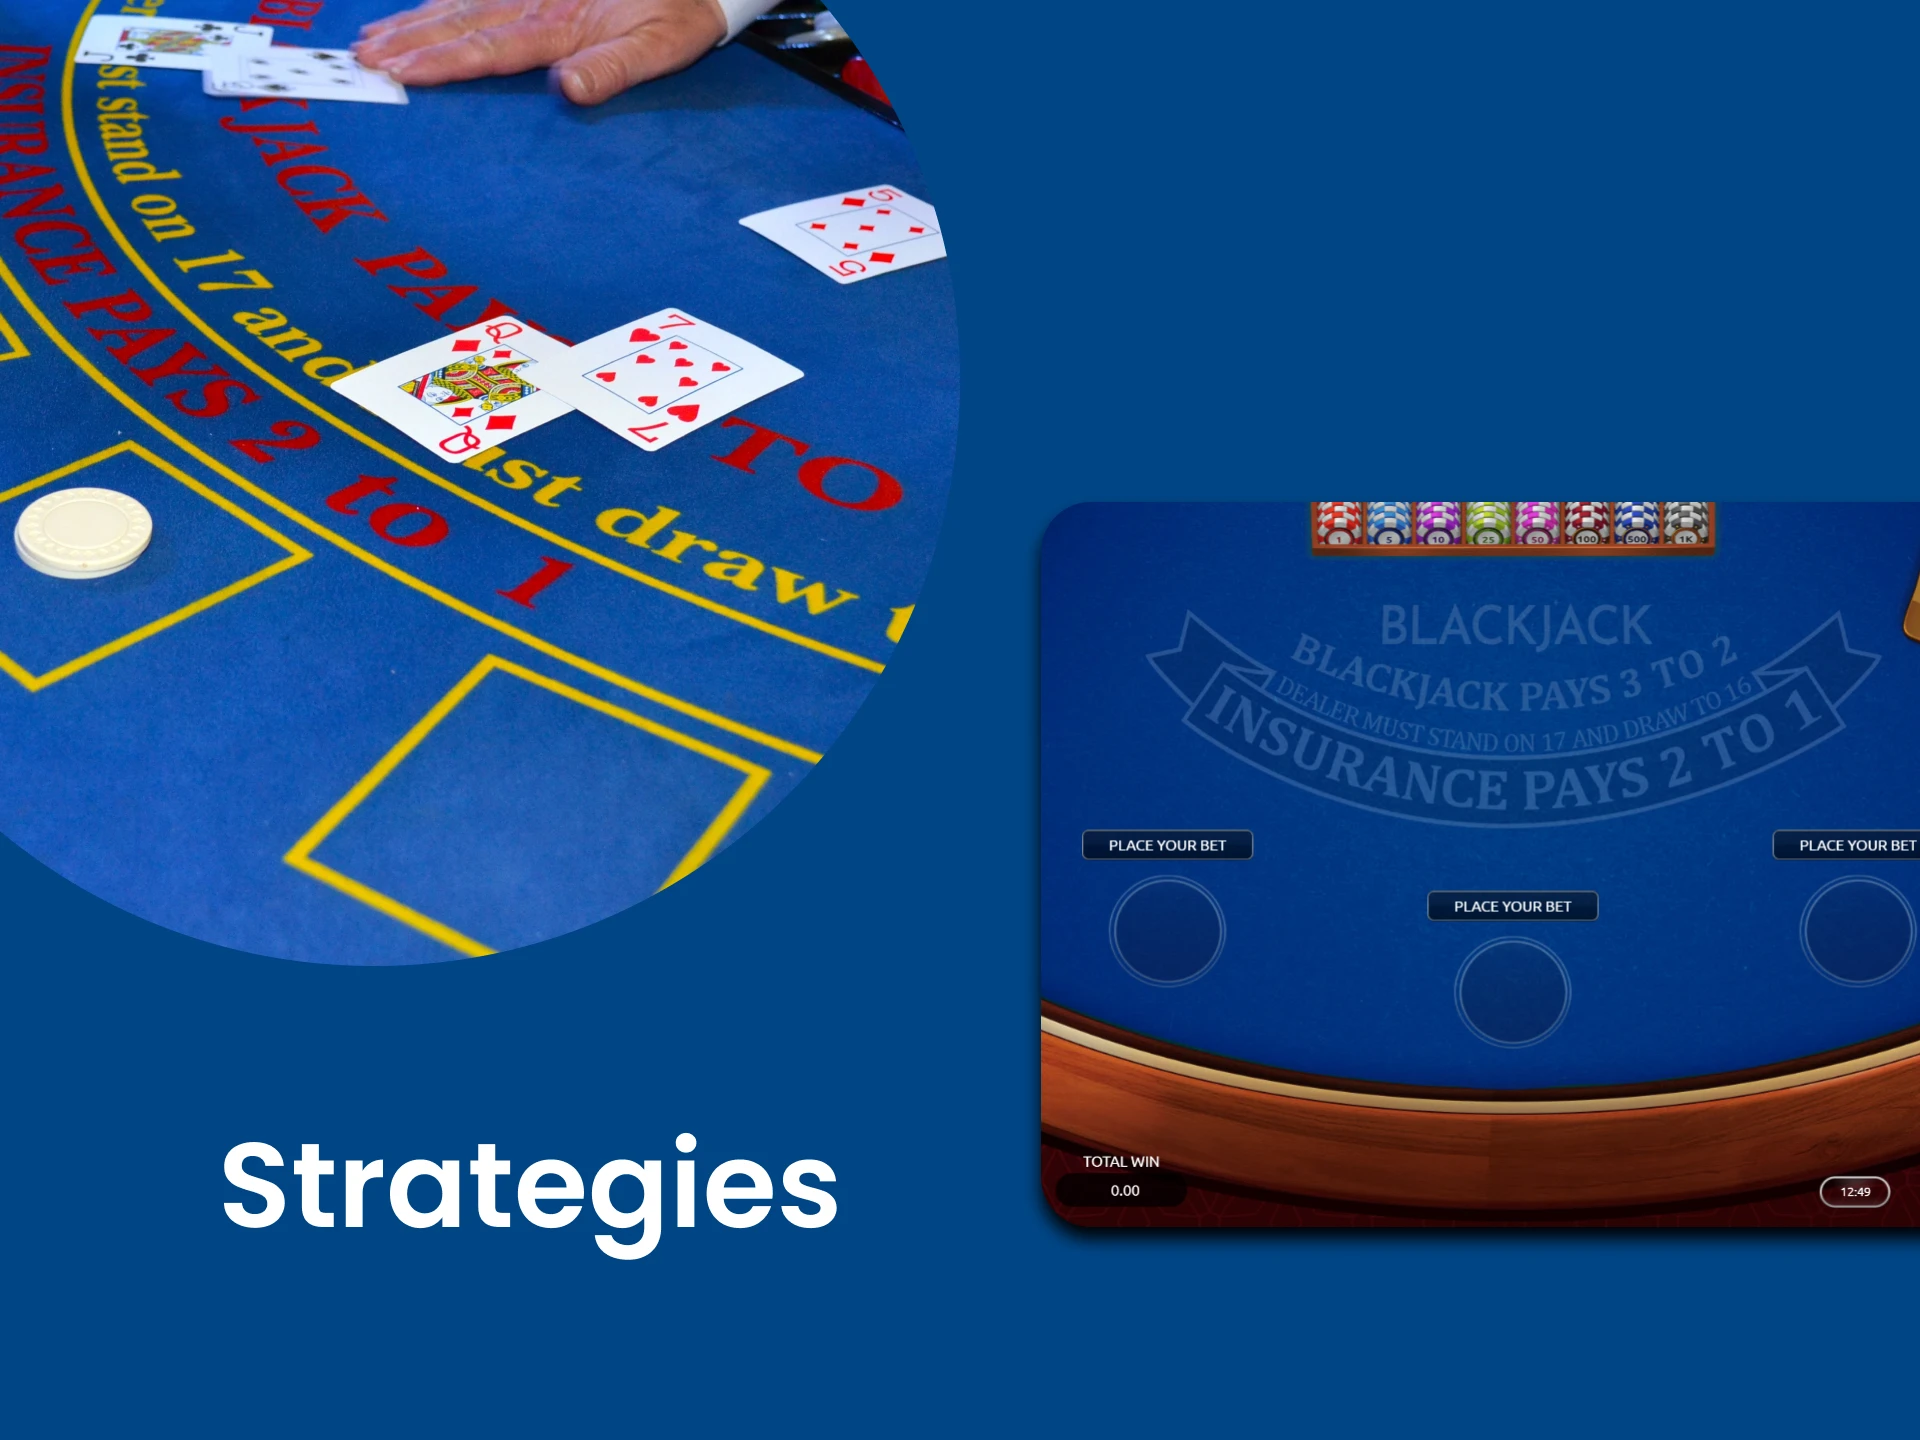 Learn strategies for winning at the casino.